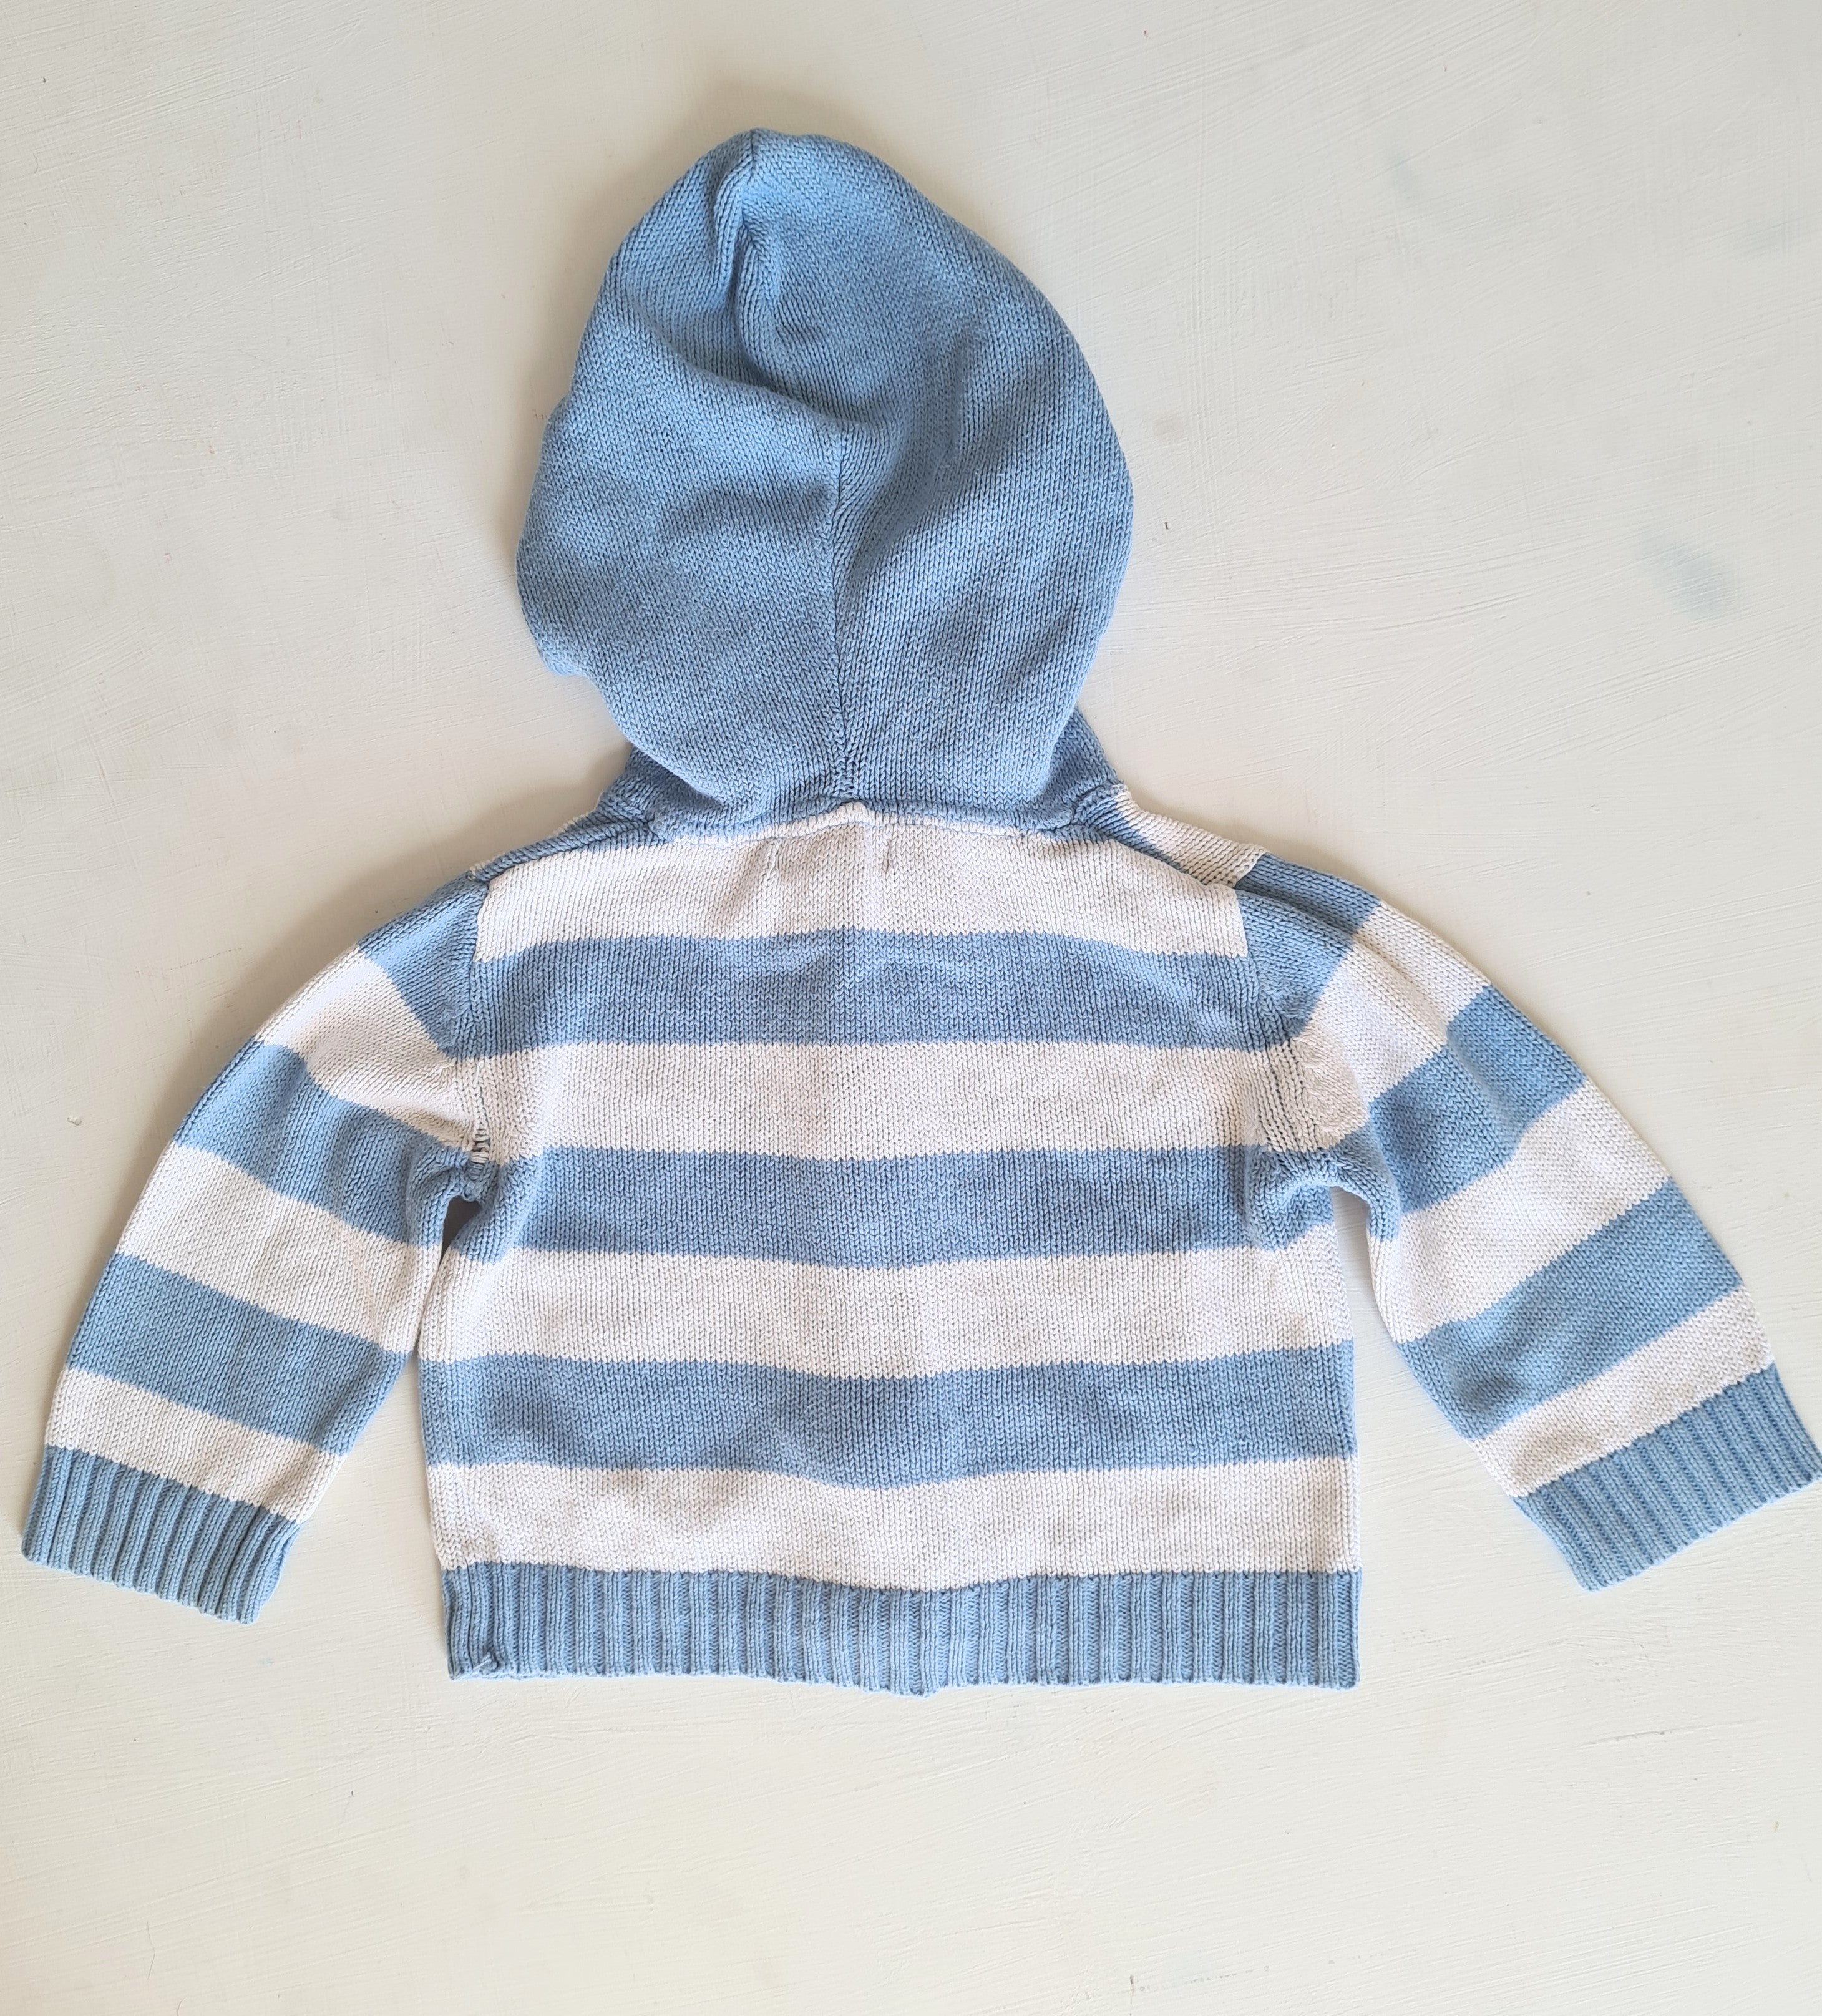 THRIFT Pumpkin Patch - Knitted Blue Stripe Cardigan Size 12/18 month